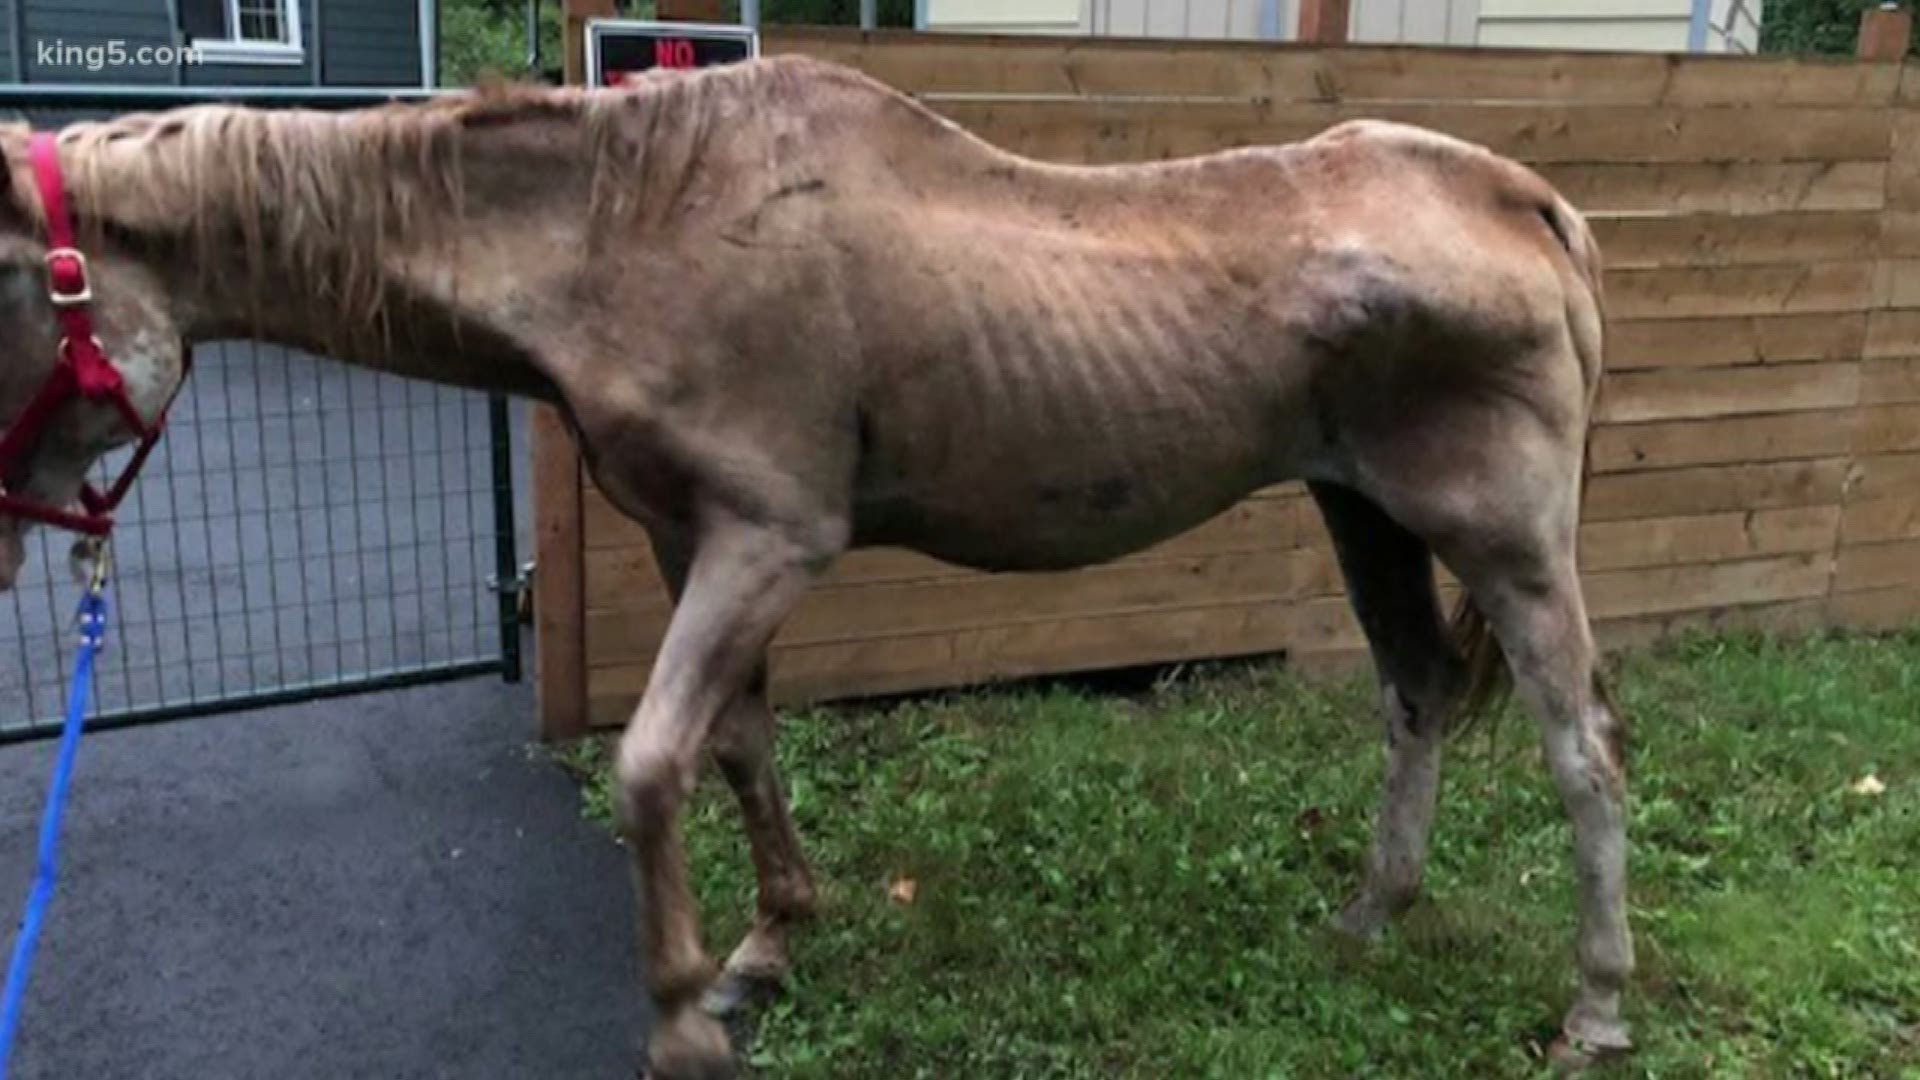 Emaciated horse dies as King County officials search for its owners |  